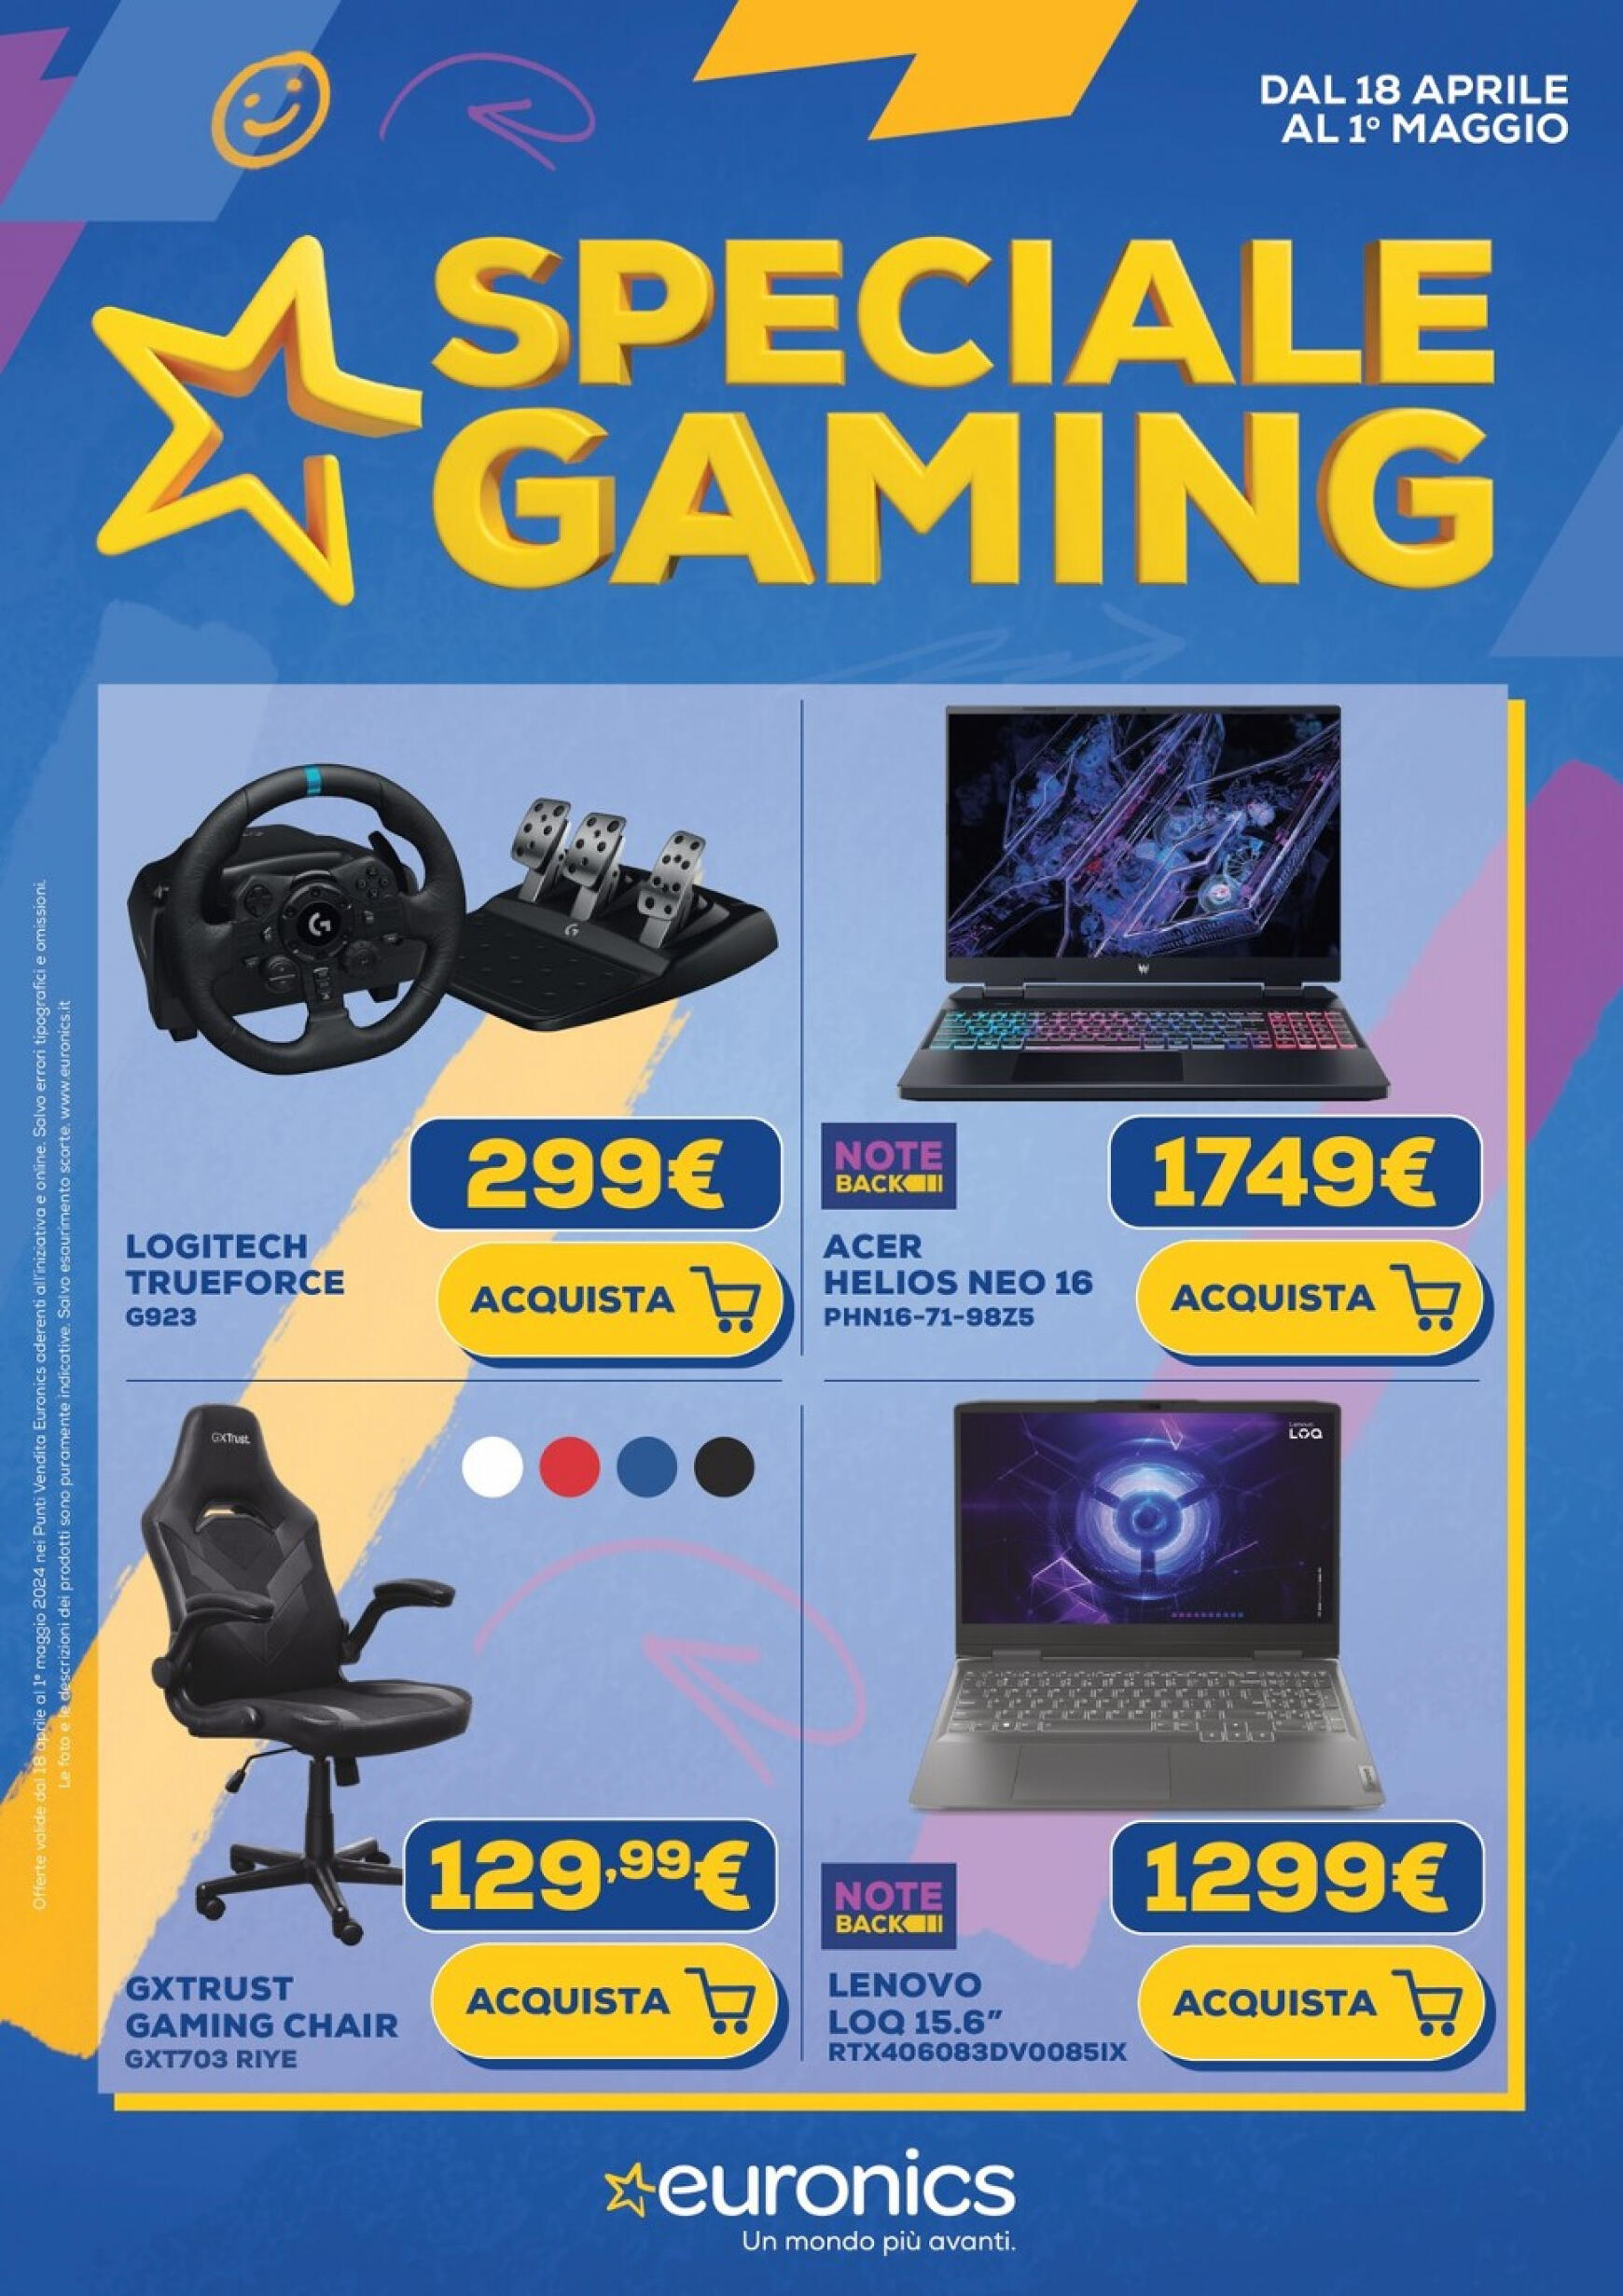 euronics - Nuovo volantino Euronics - Speciale Gaming 18.04. - 01.05. - page: 1